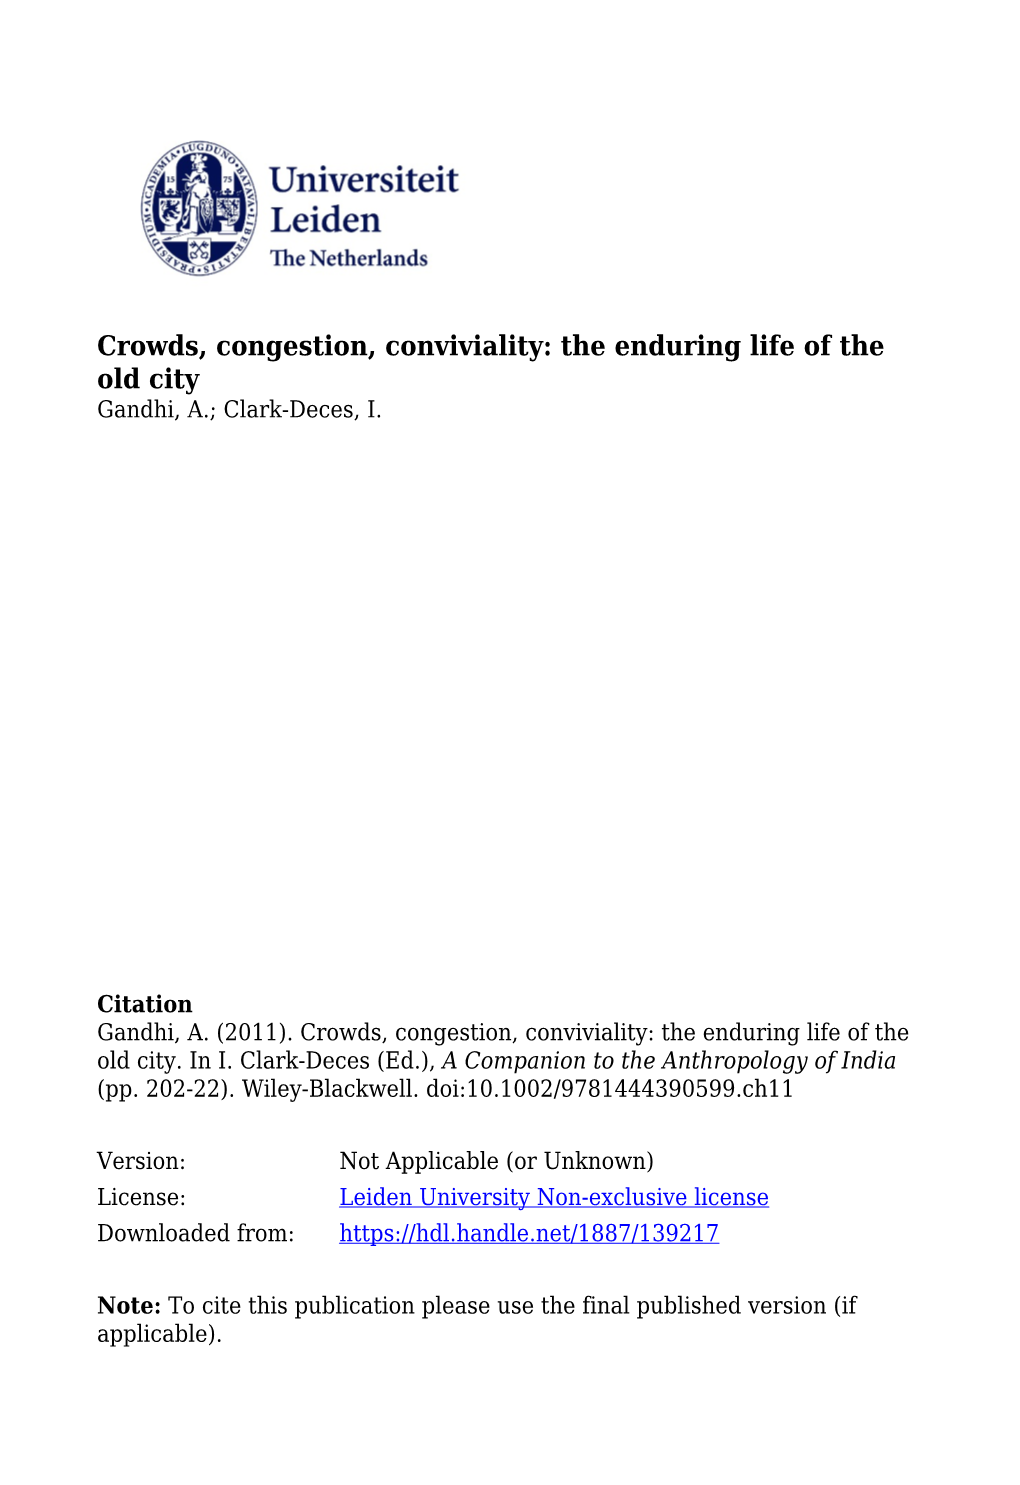 Crowds, Congestion, Conviviality: the Enduring Life of the Old City Gandhi, A.; Clark-Deces, I